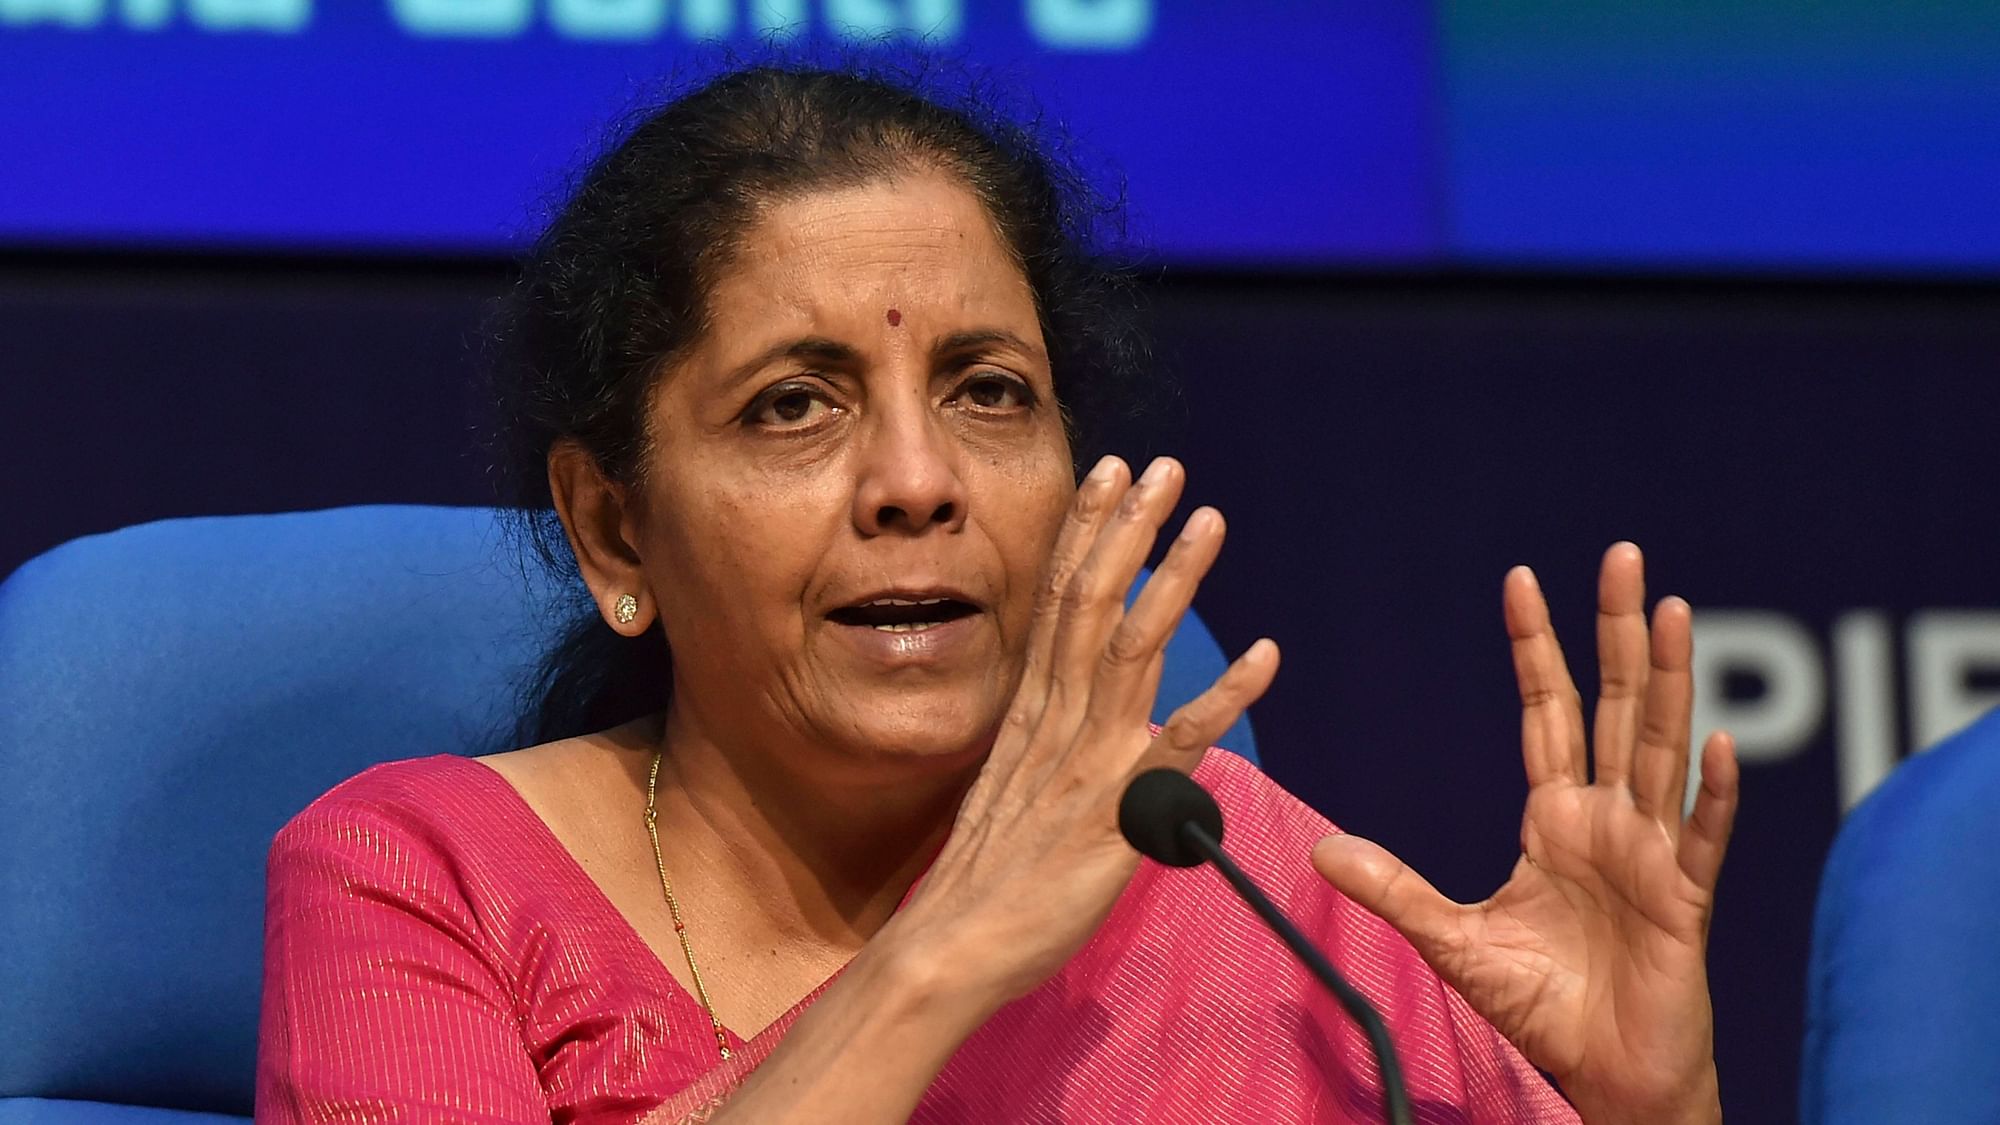 Sitharaman said the government will bring in a new national education policy to transform India’s higher education system to one of the best in the world.